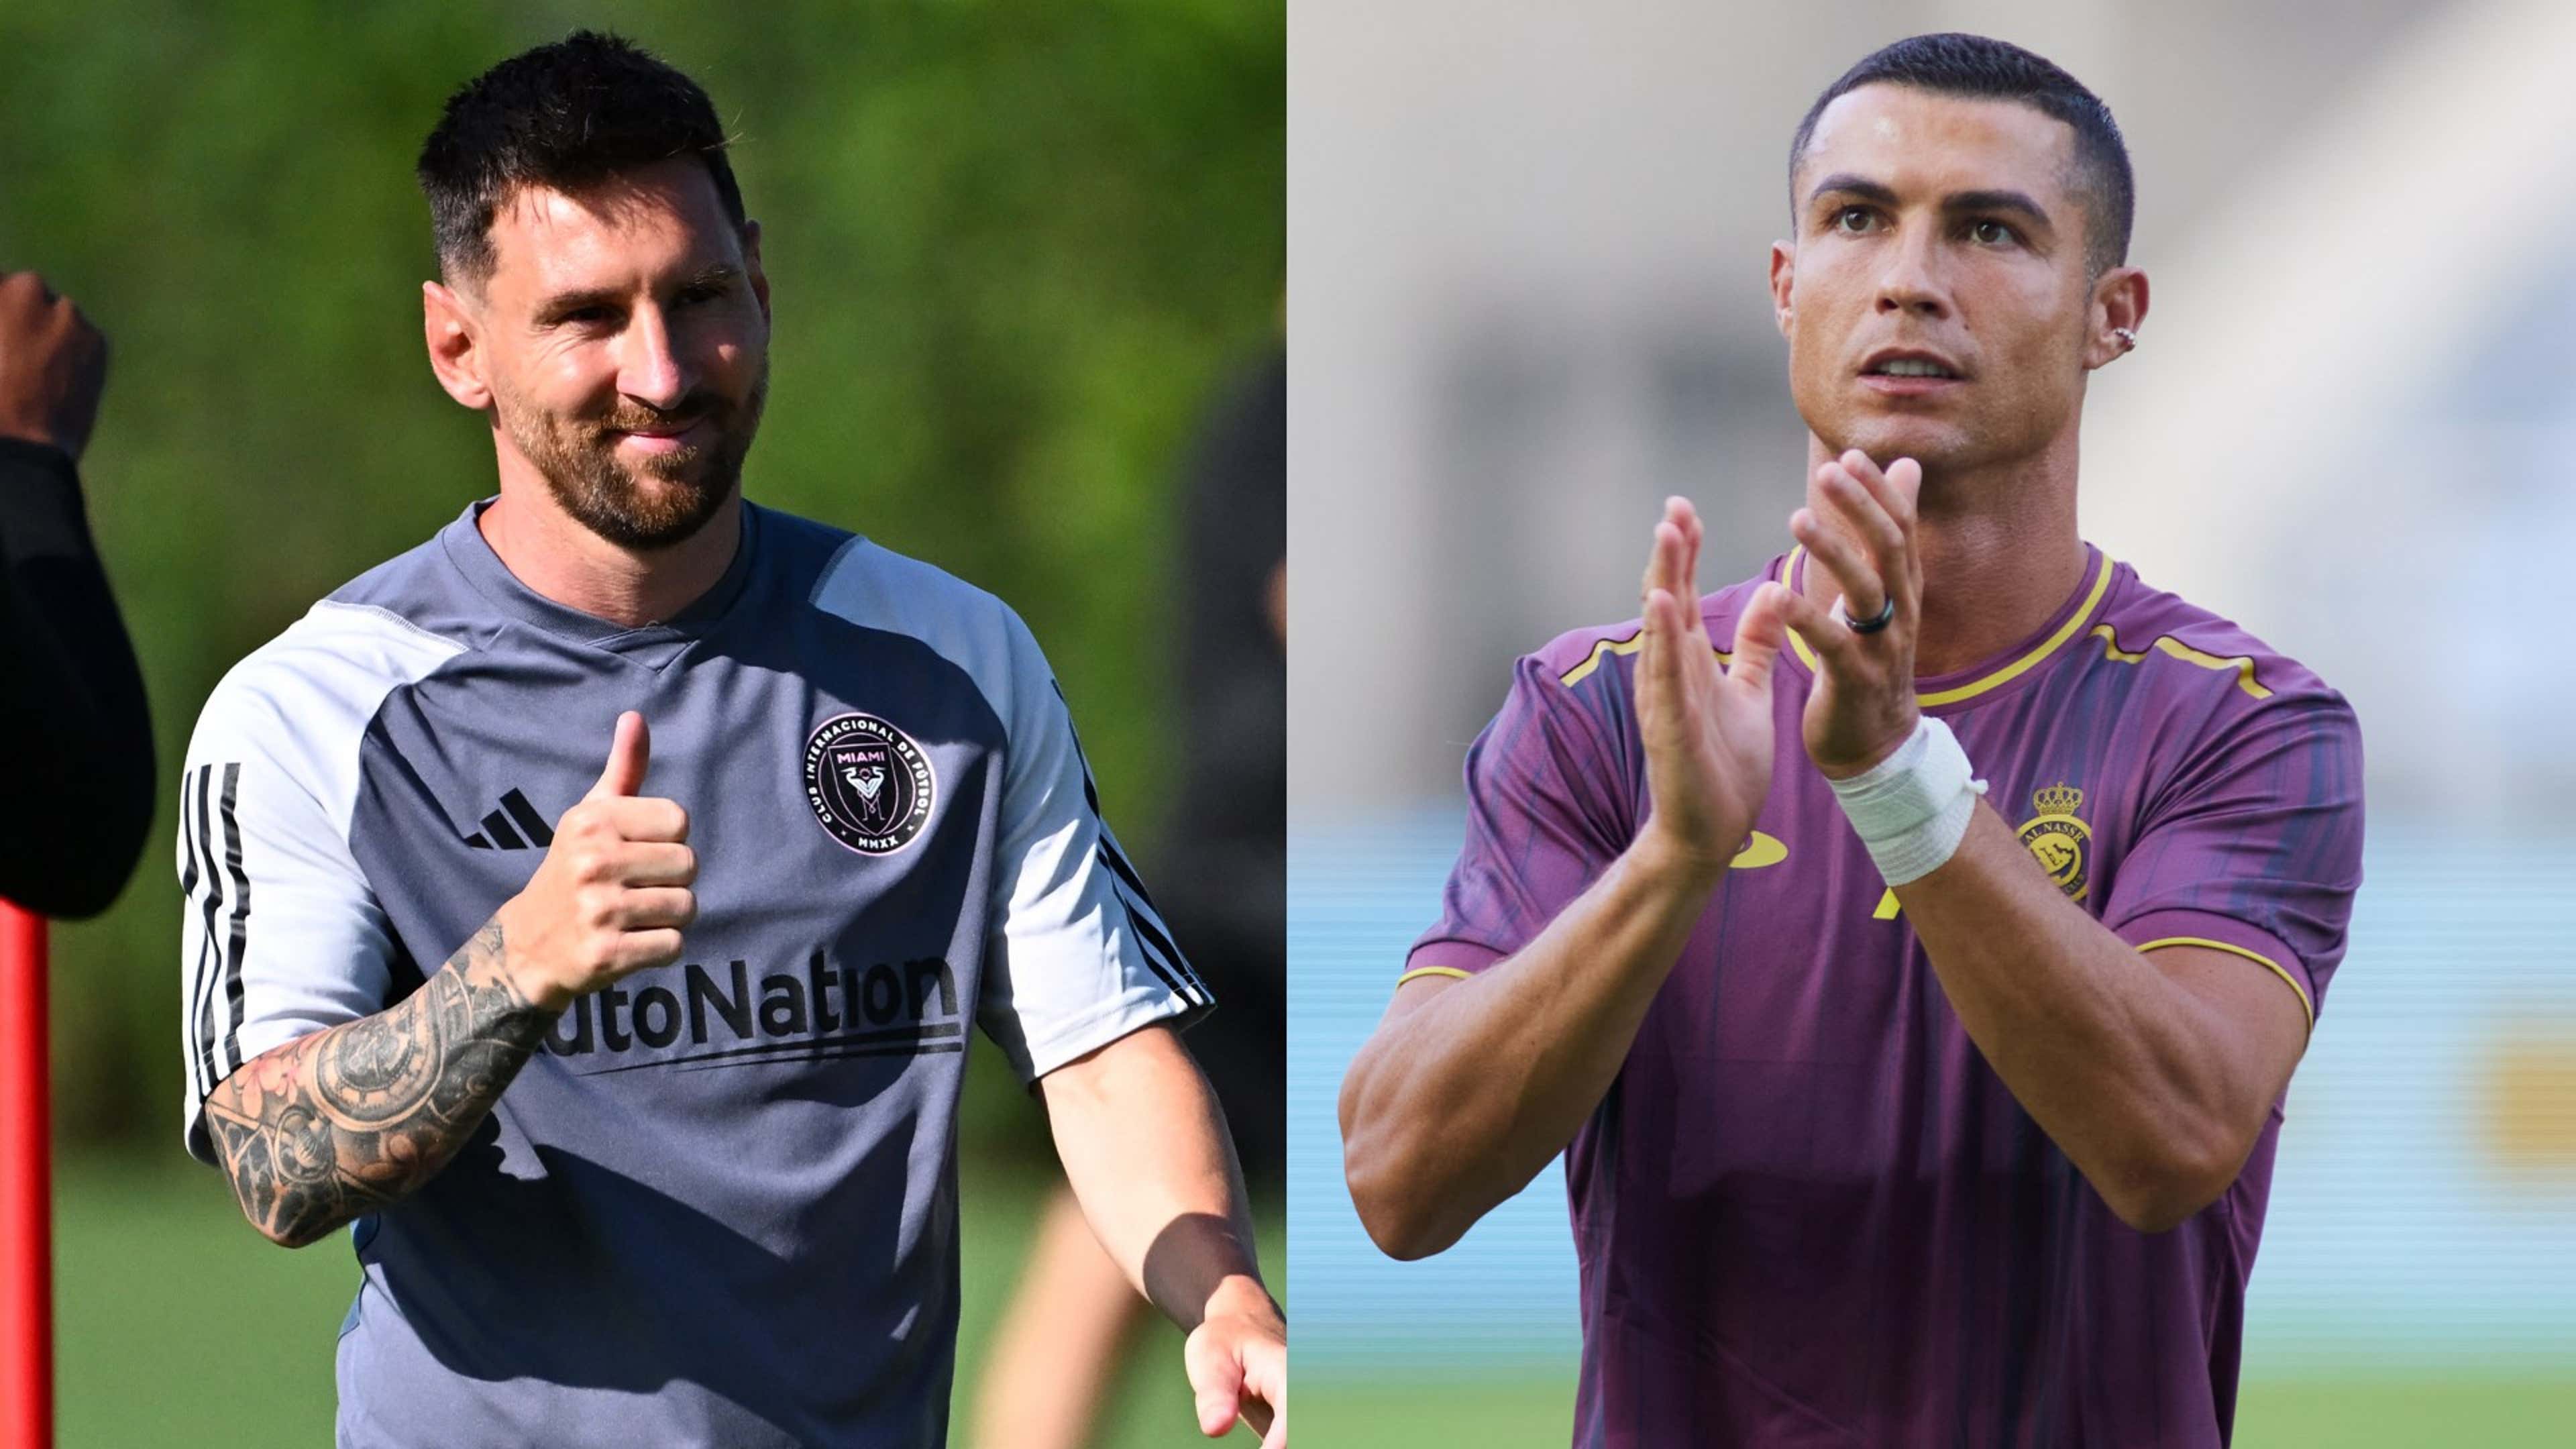 Inter miami superstar lionel messi admits he was attracted to joining cristiano ronaldo in very powerful saudi pro league before his transfer to mls